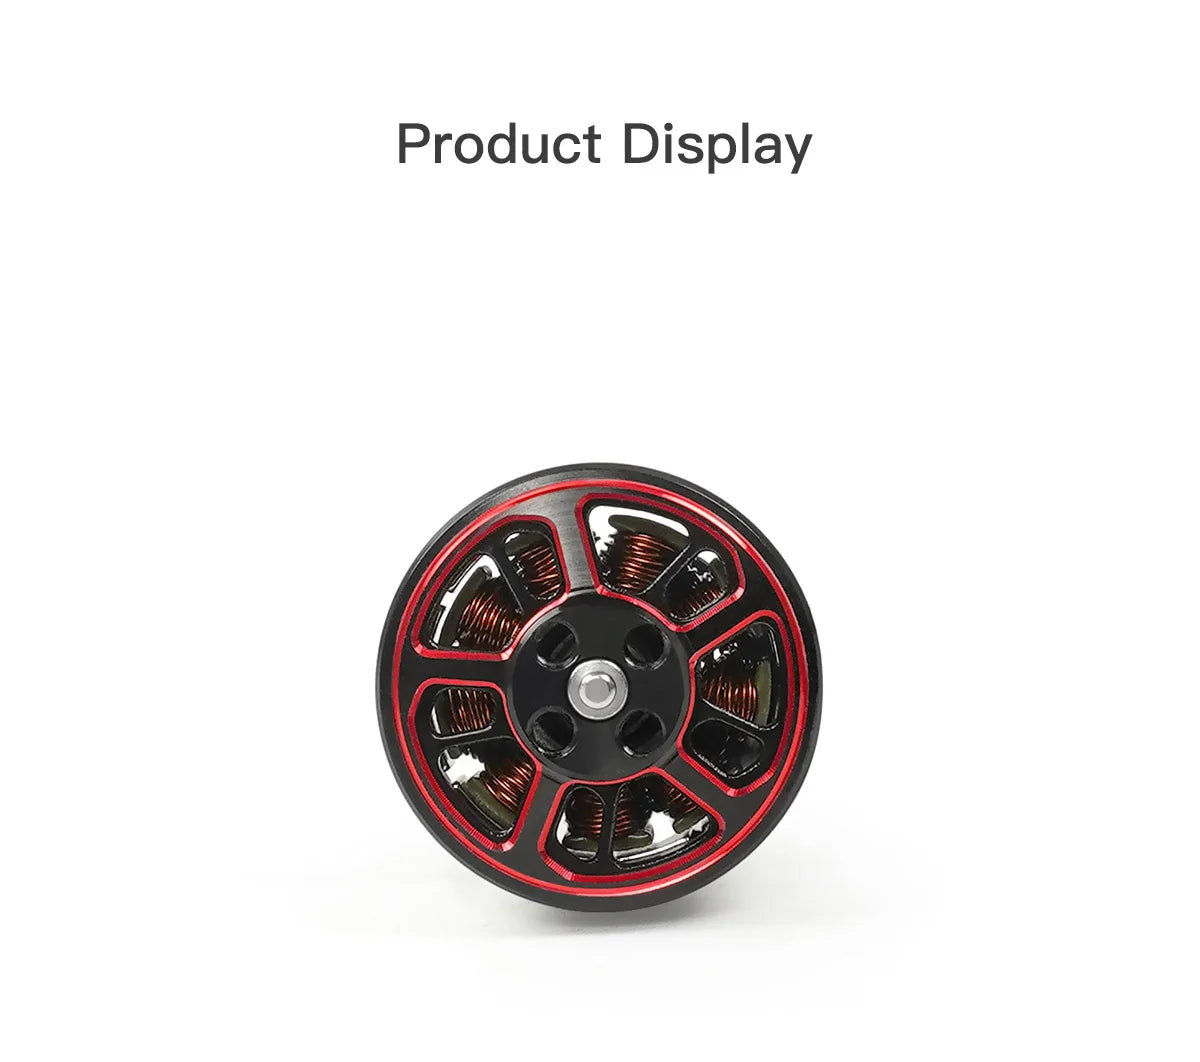 4.Suitable for 2-inch-4-inch lightweight chassis